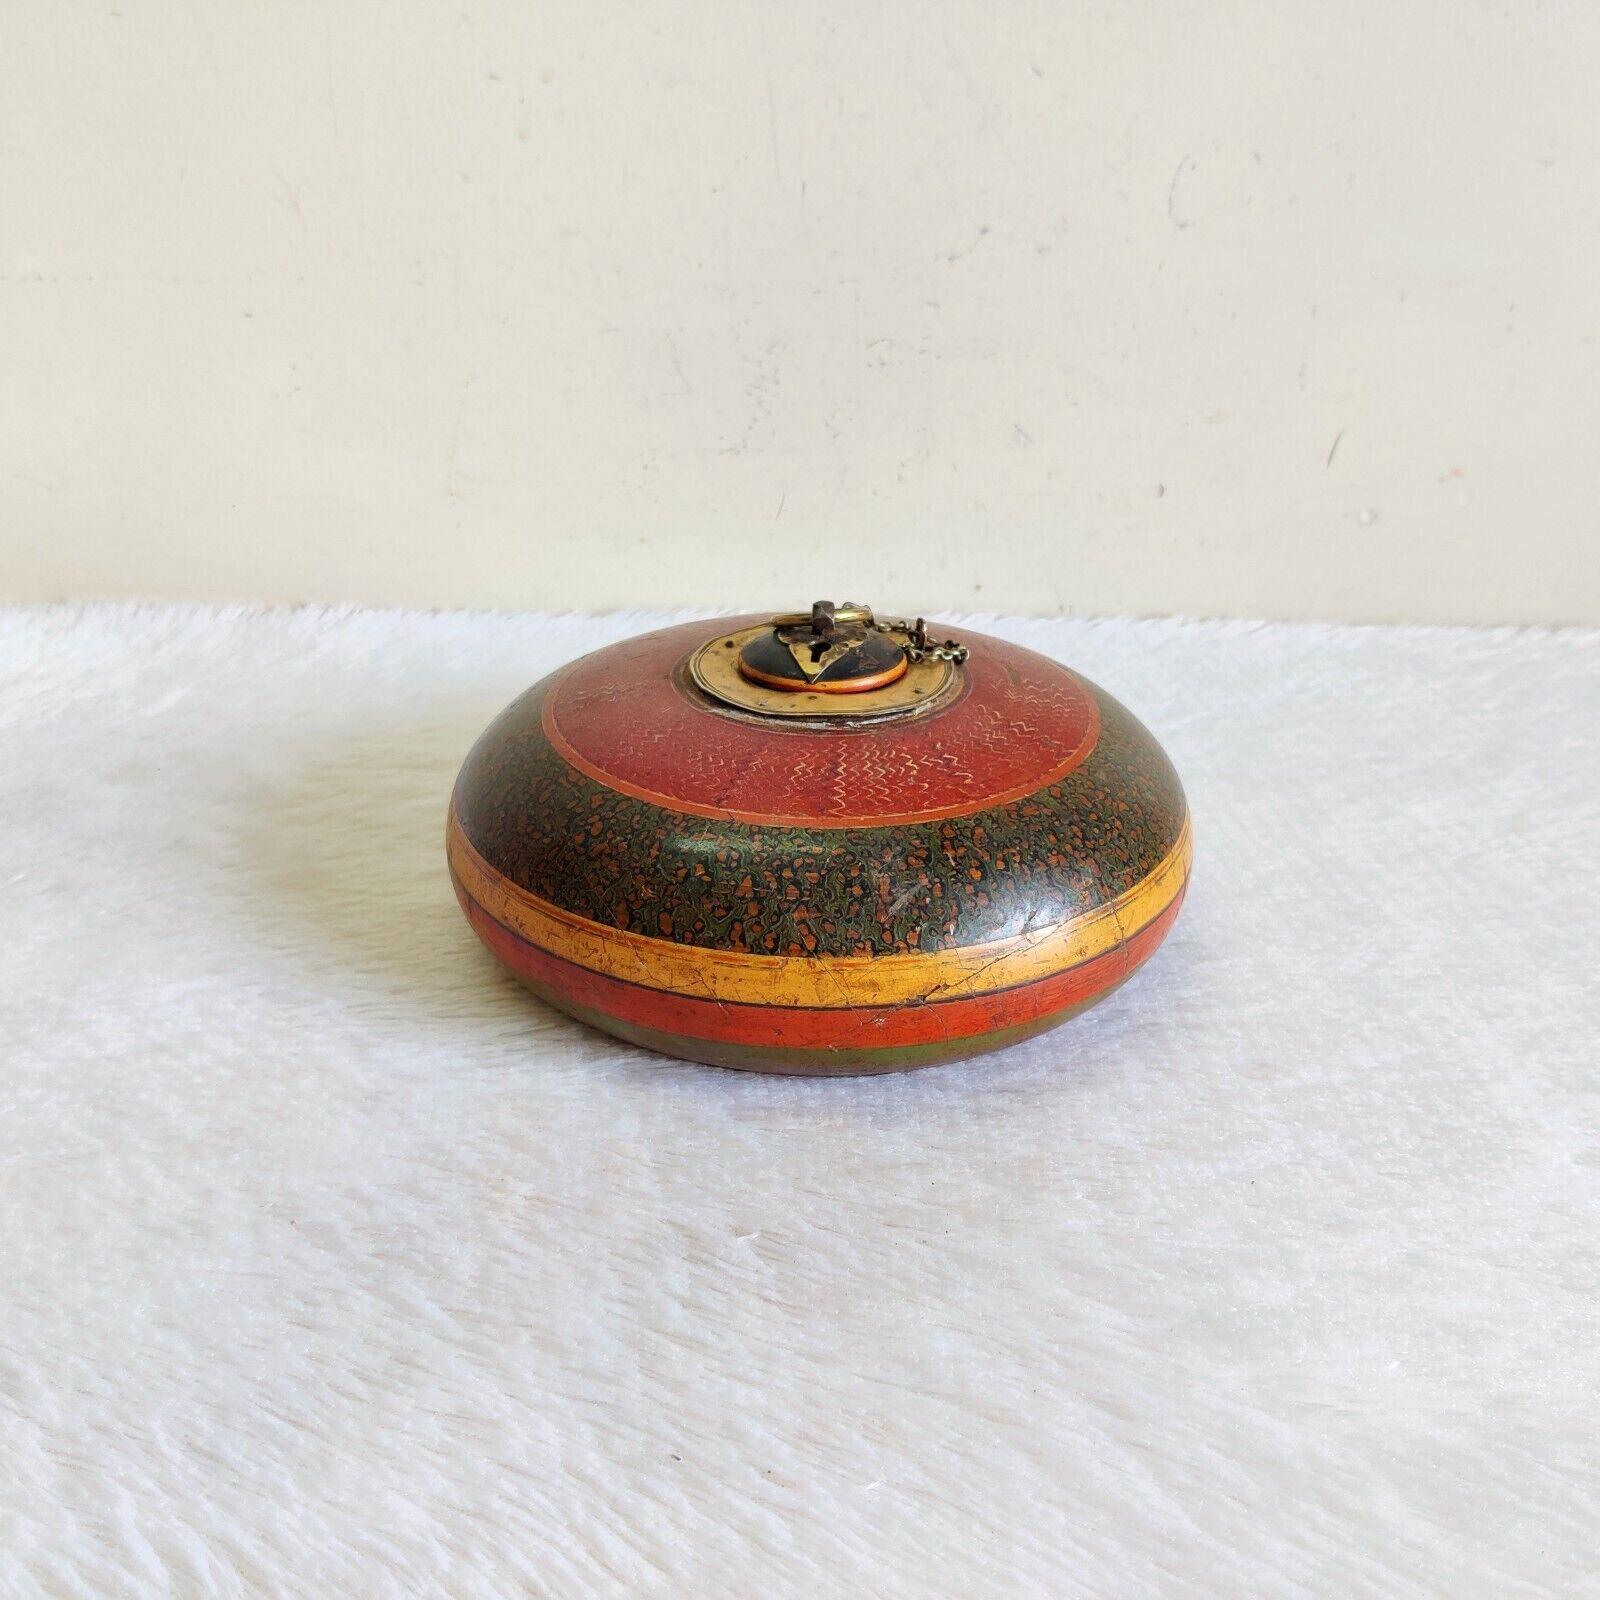 19c Vintage Wooden Handmade Hand Painted Tobacco Box Lock on Top Decorative WD61